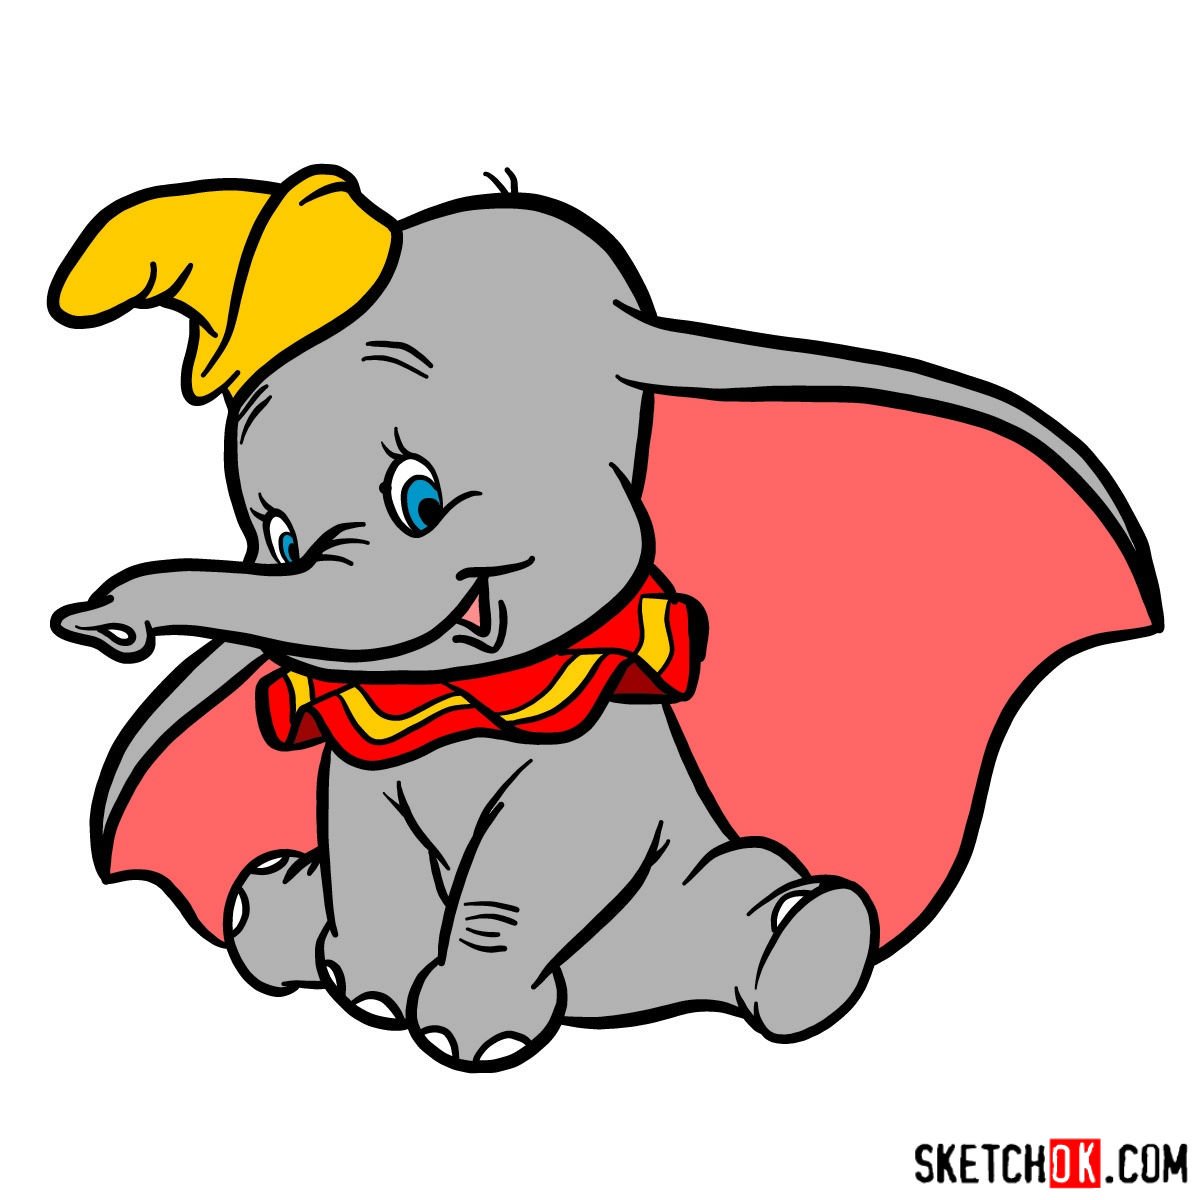 How to draw Dumbo the elephant - Sketchok easy drawing guides